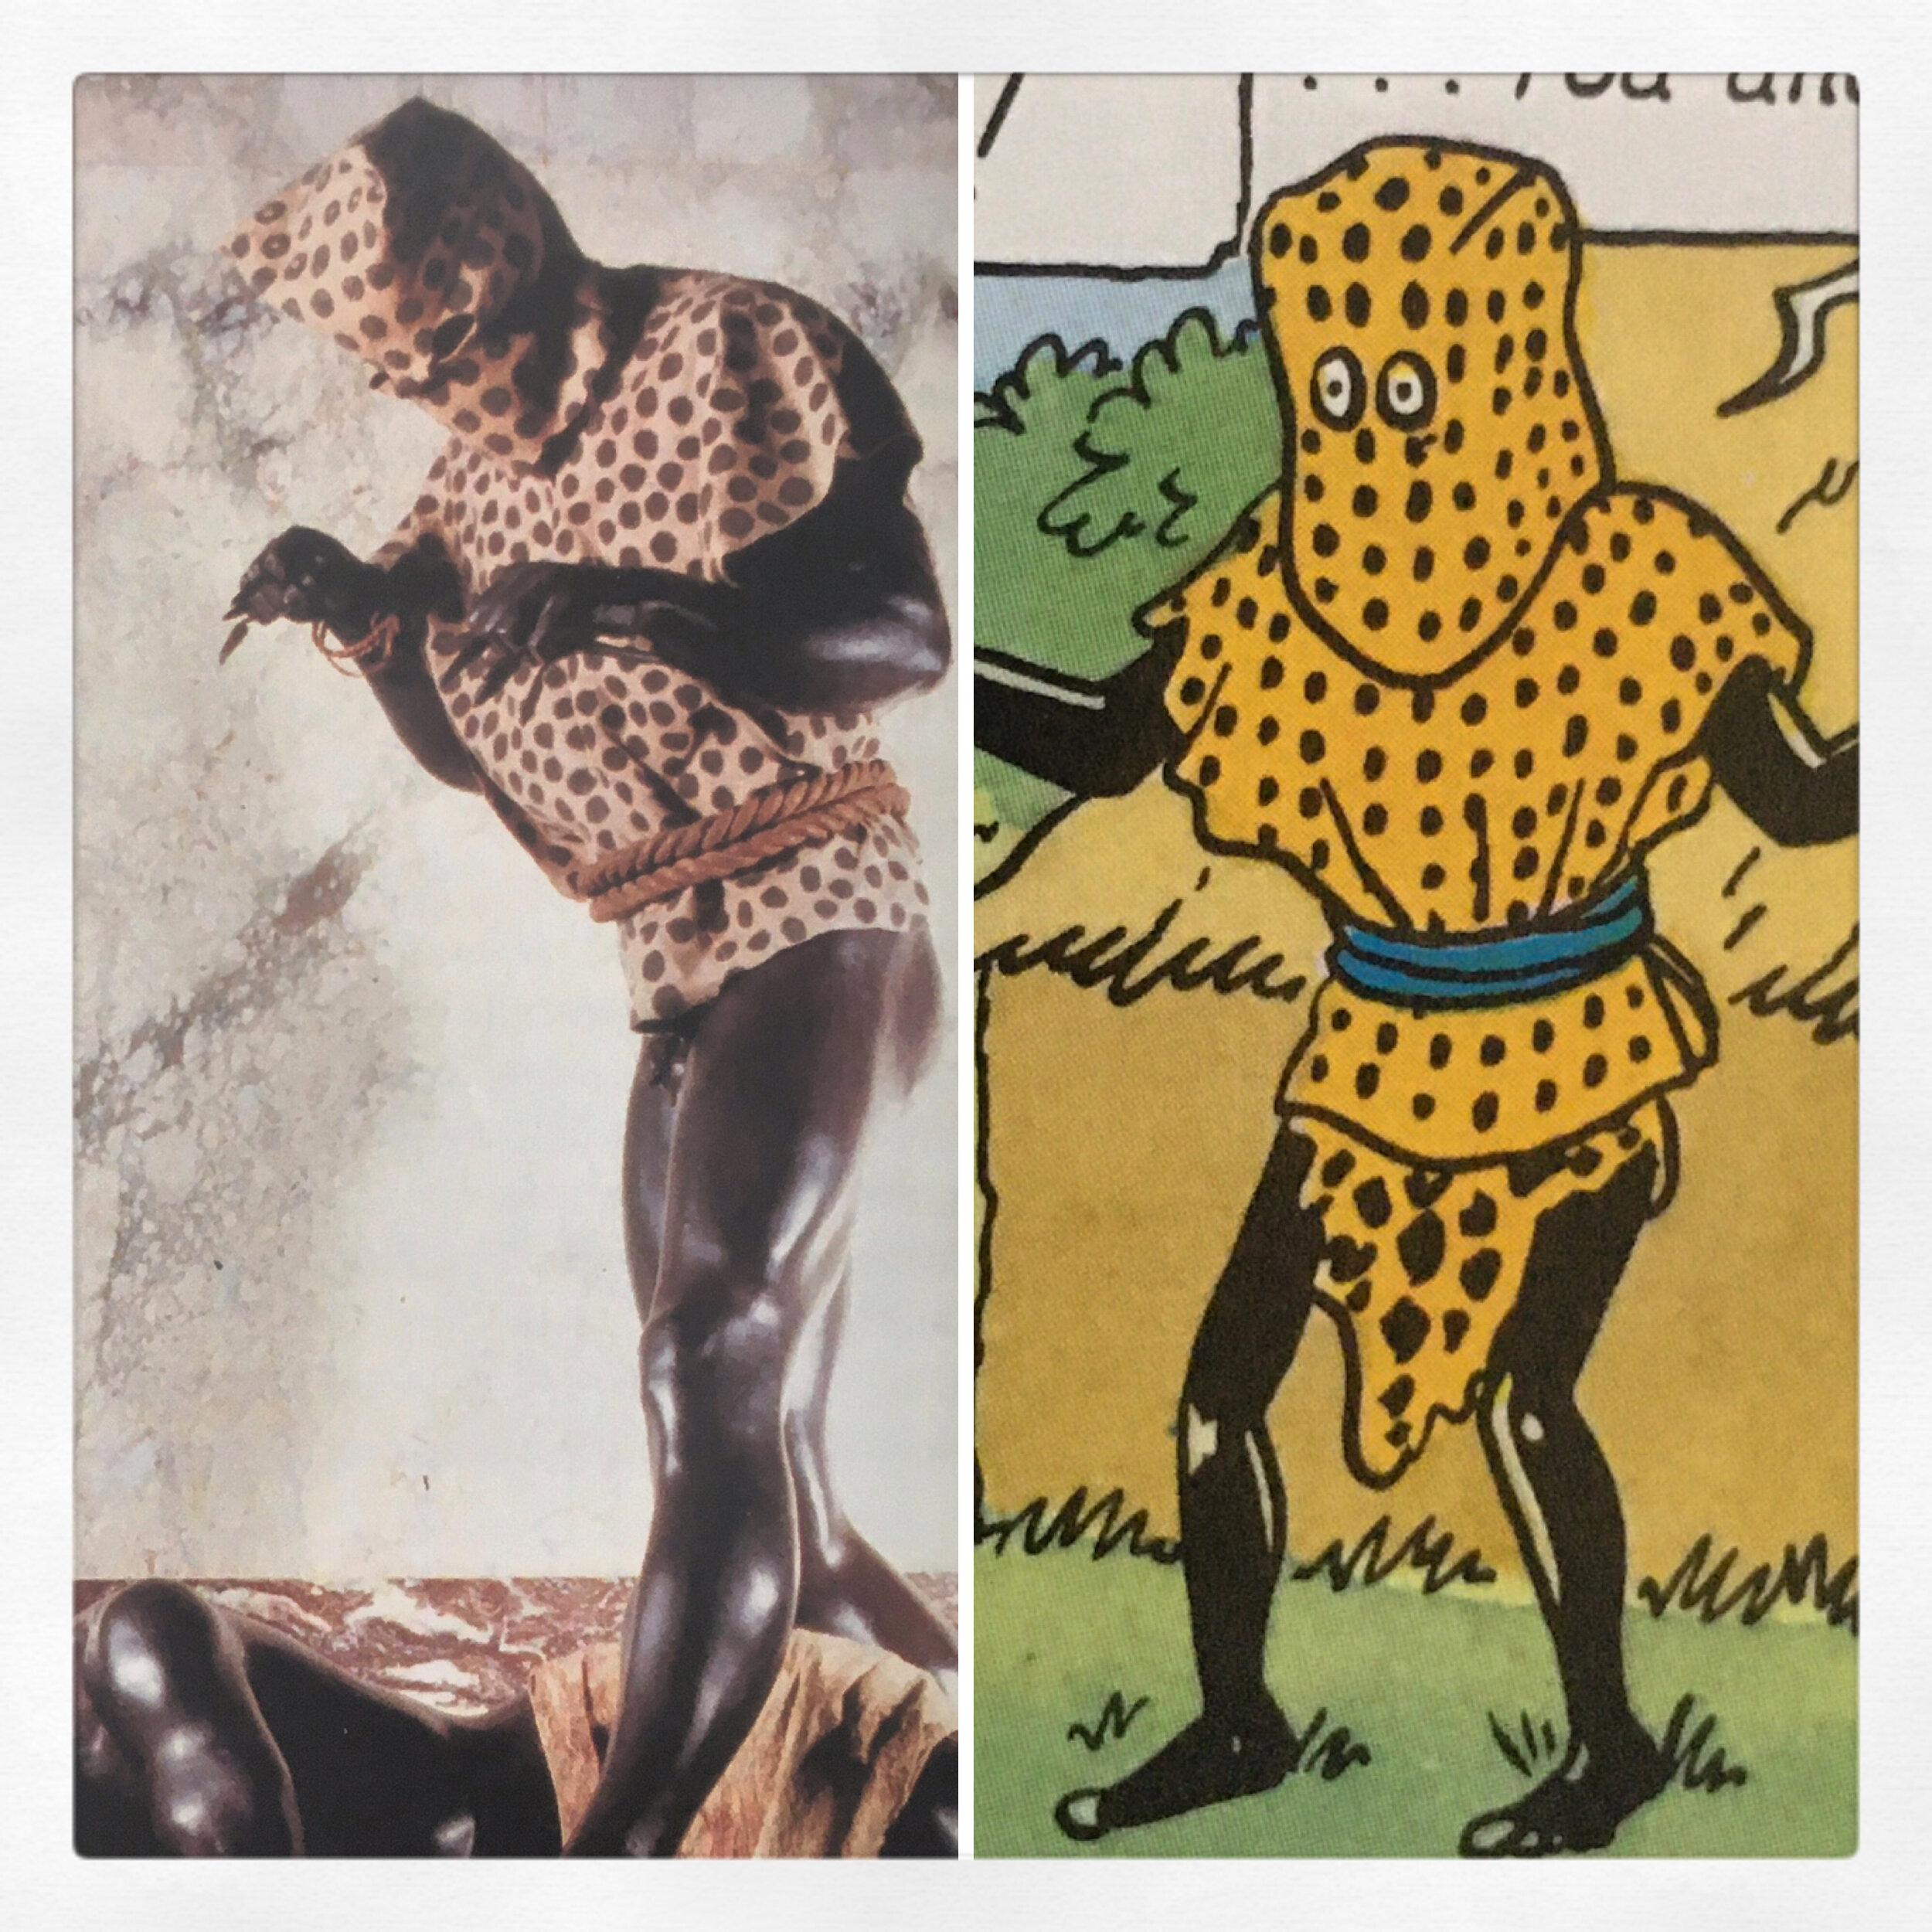  While Hergé’s initial few stories were light on the meticulous research that would later come to mark the series, the Congolese ‘leopard man’ costume he discovered at the Museum of Central Africa in Tervuren instantly captured his imagination and wa